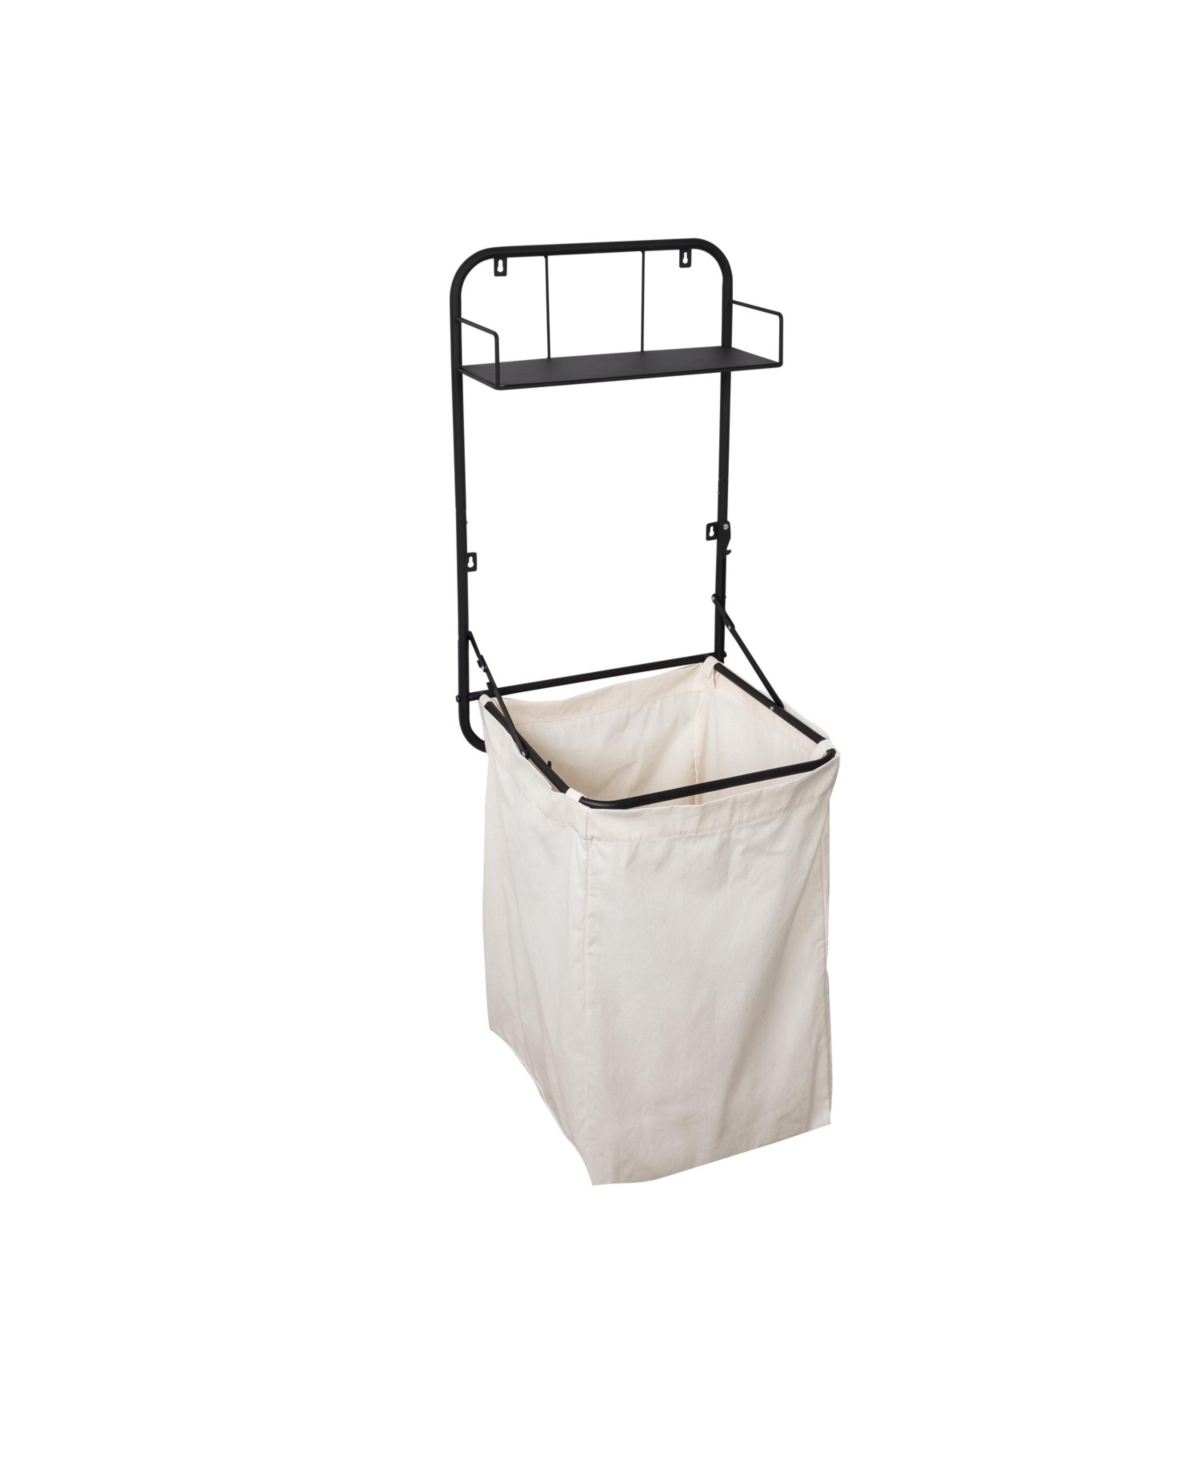 Collapsible Wall-Mounted Clothes Hamper with Canvas Bag and Laundry Shelf - Black